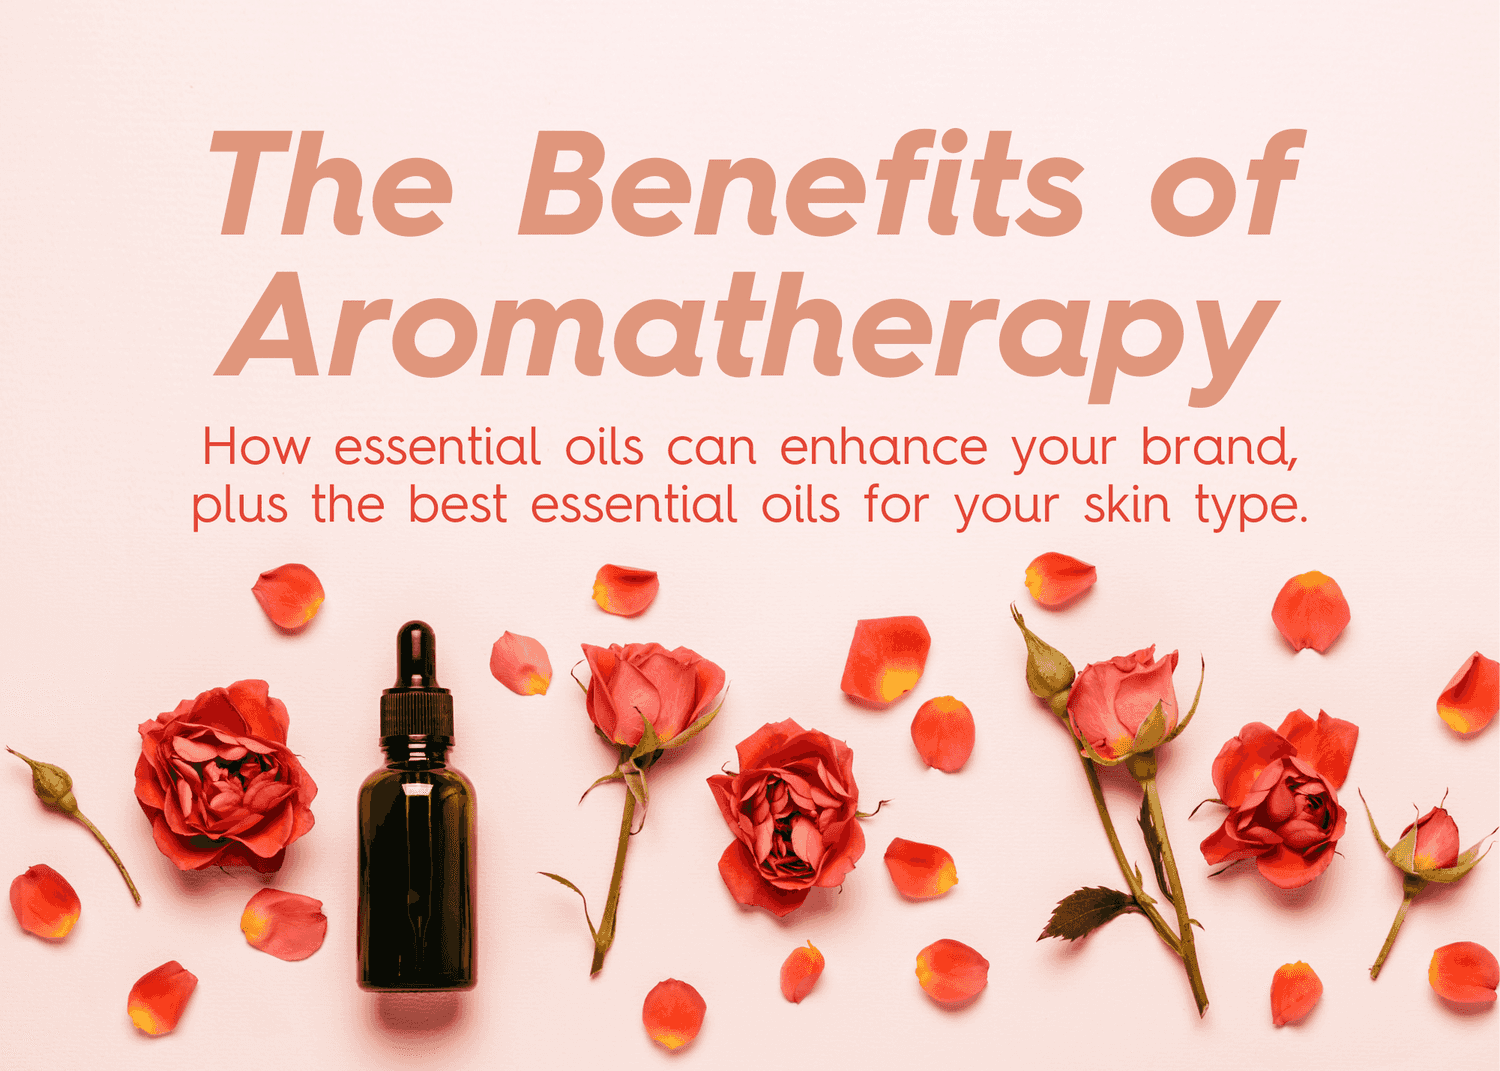 Benefits of Aromatherapy and Essential Oils - The Therapist Essentials